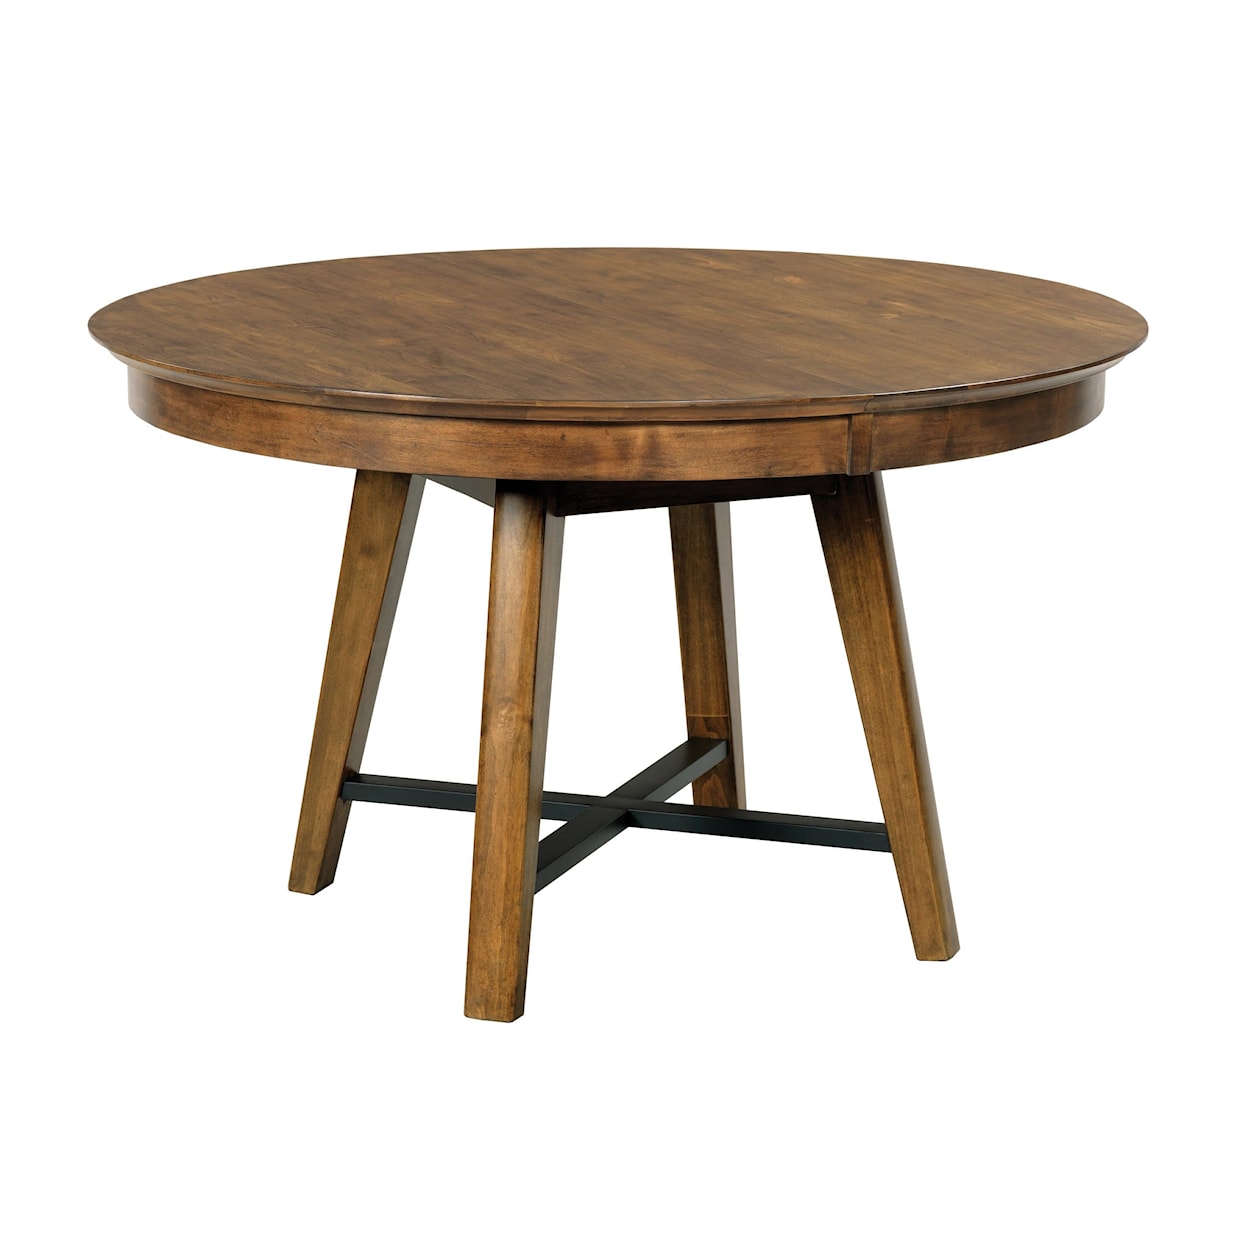 Kincaid Furniture Abode Salter Round Dining Table Complete